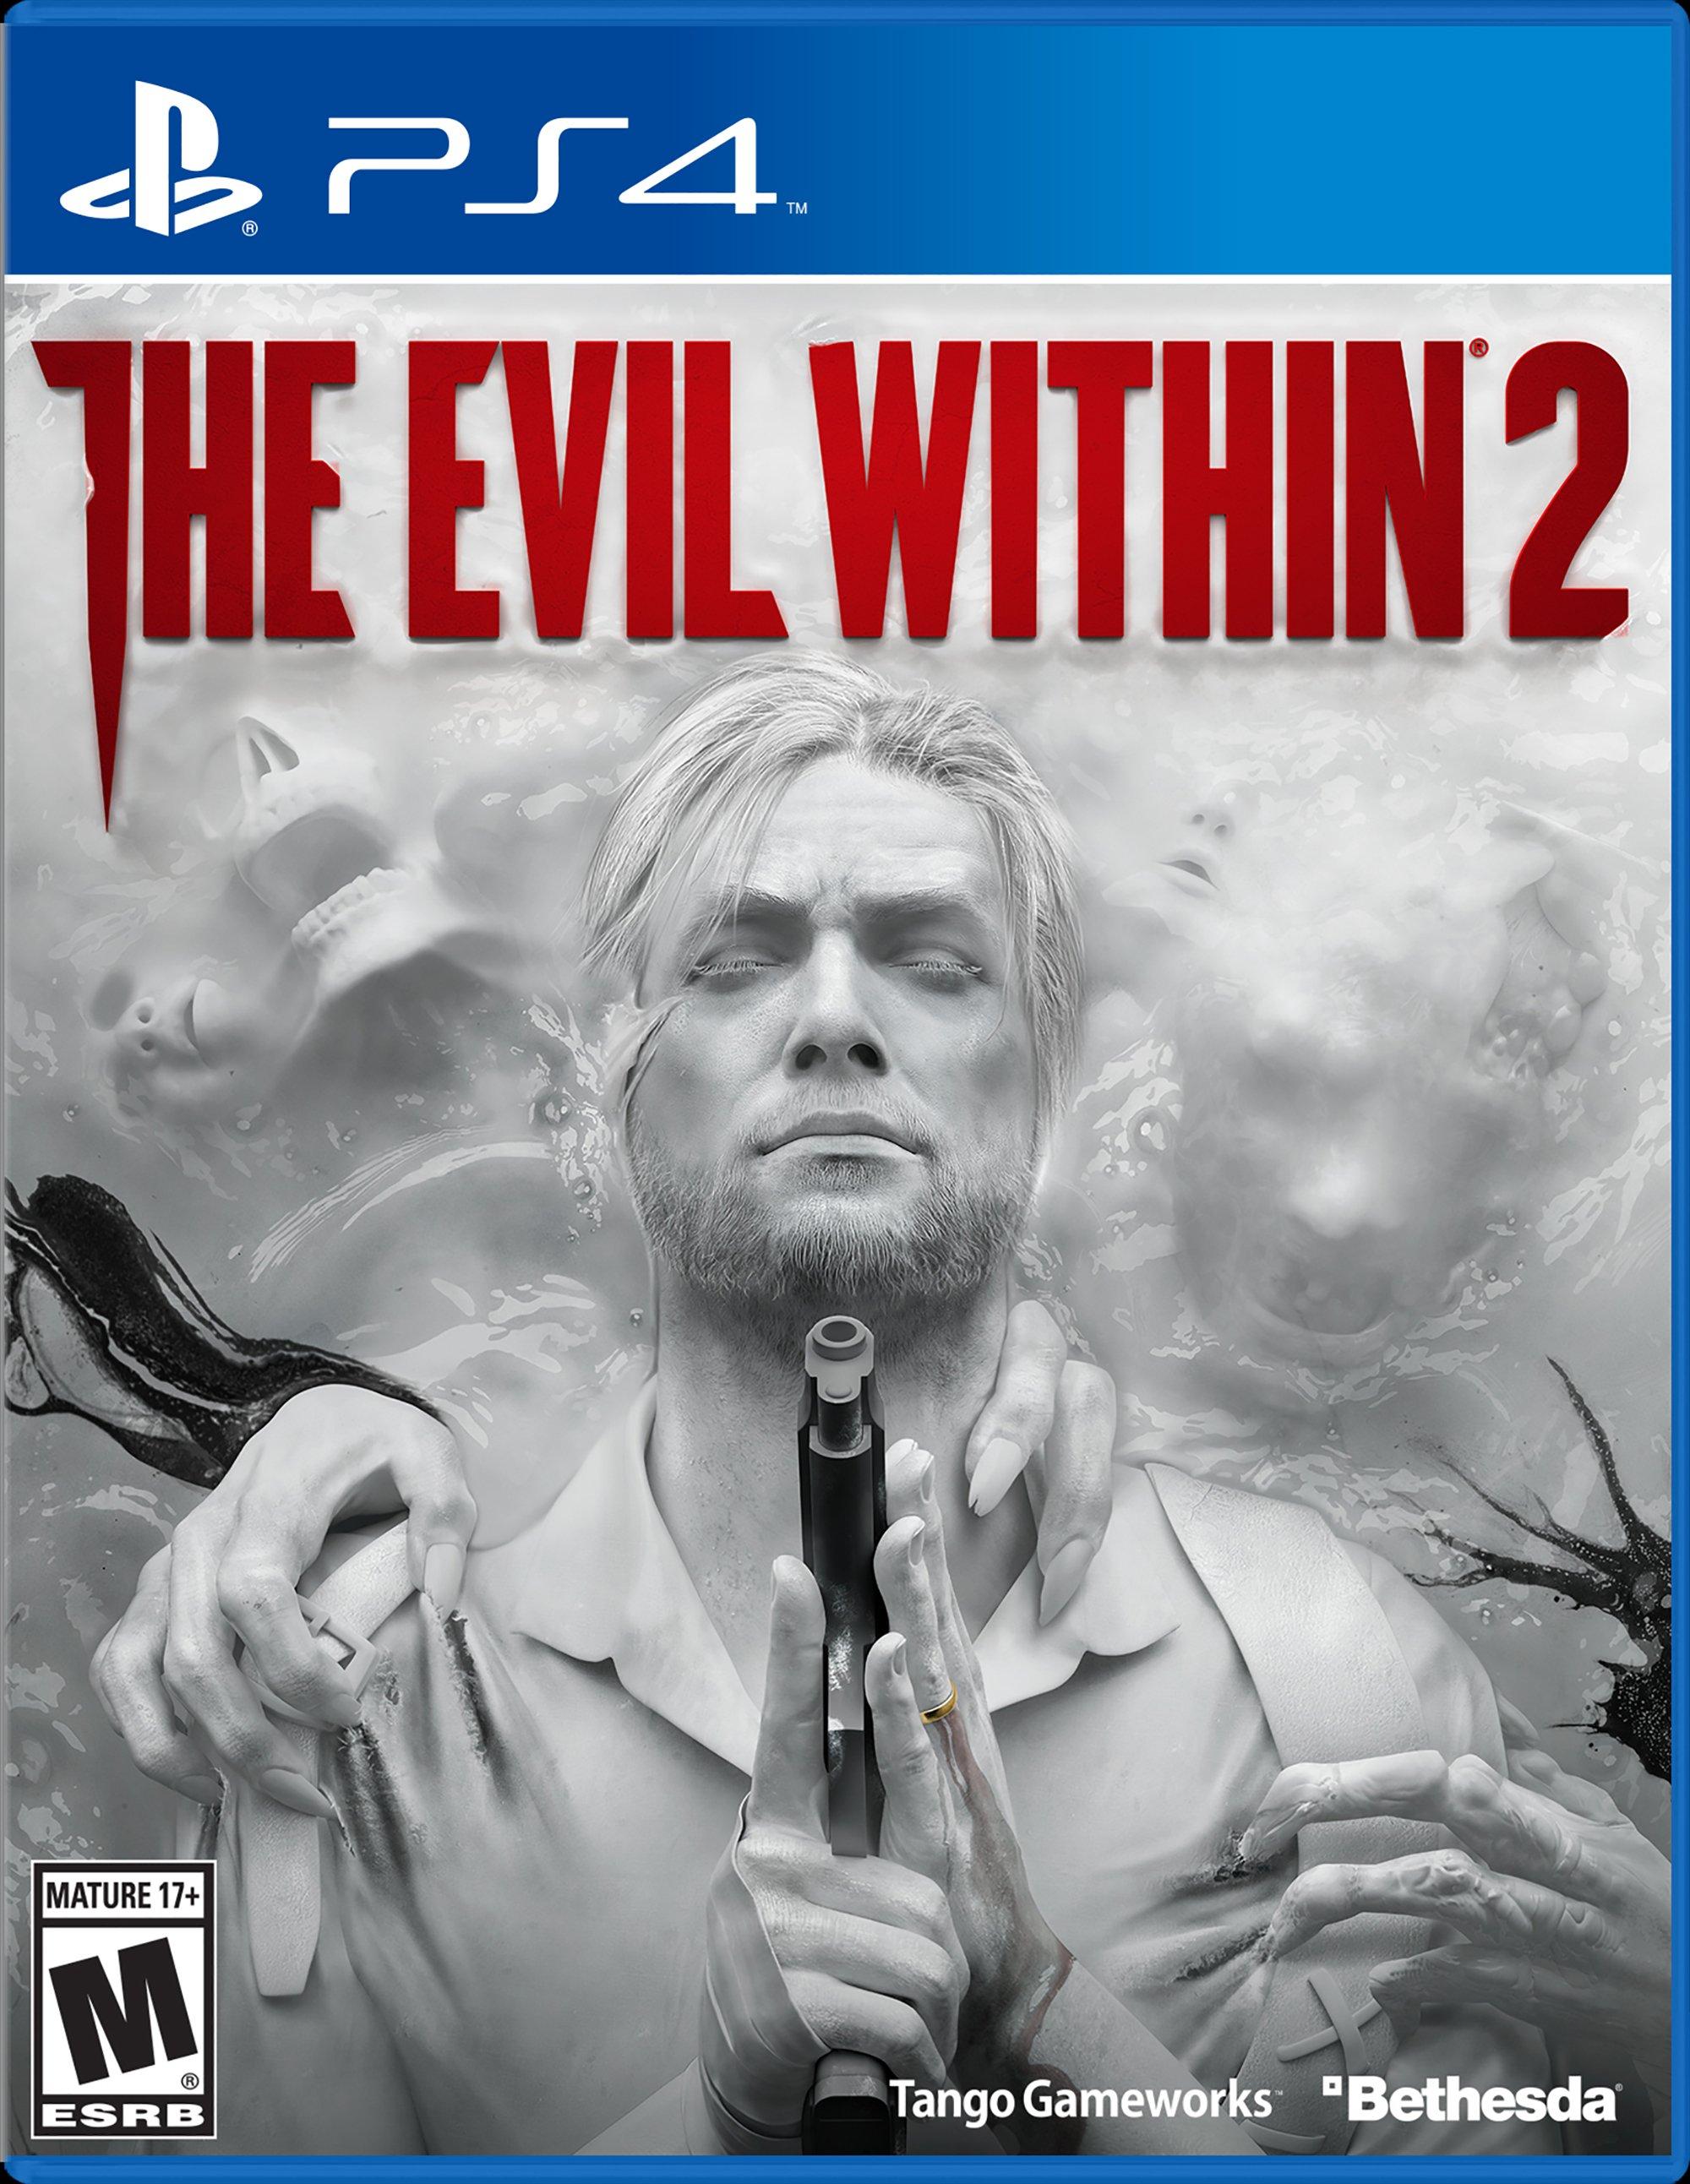 Evil Within 2 is free on  Prime Gaming - Smartprix